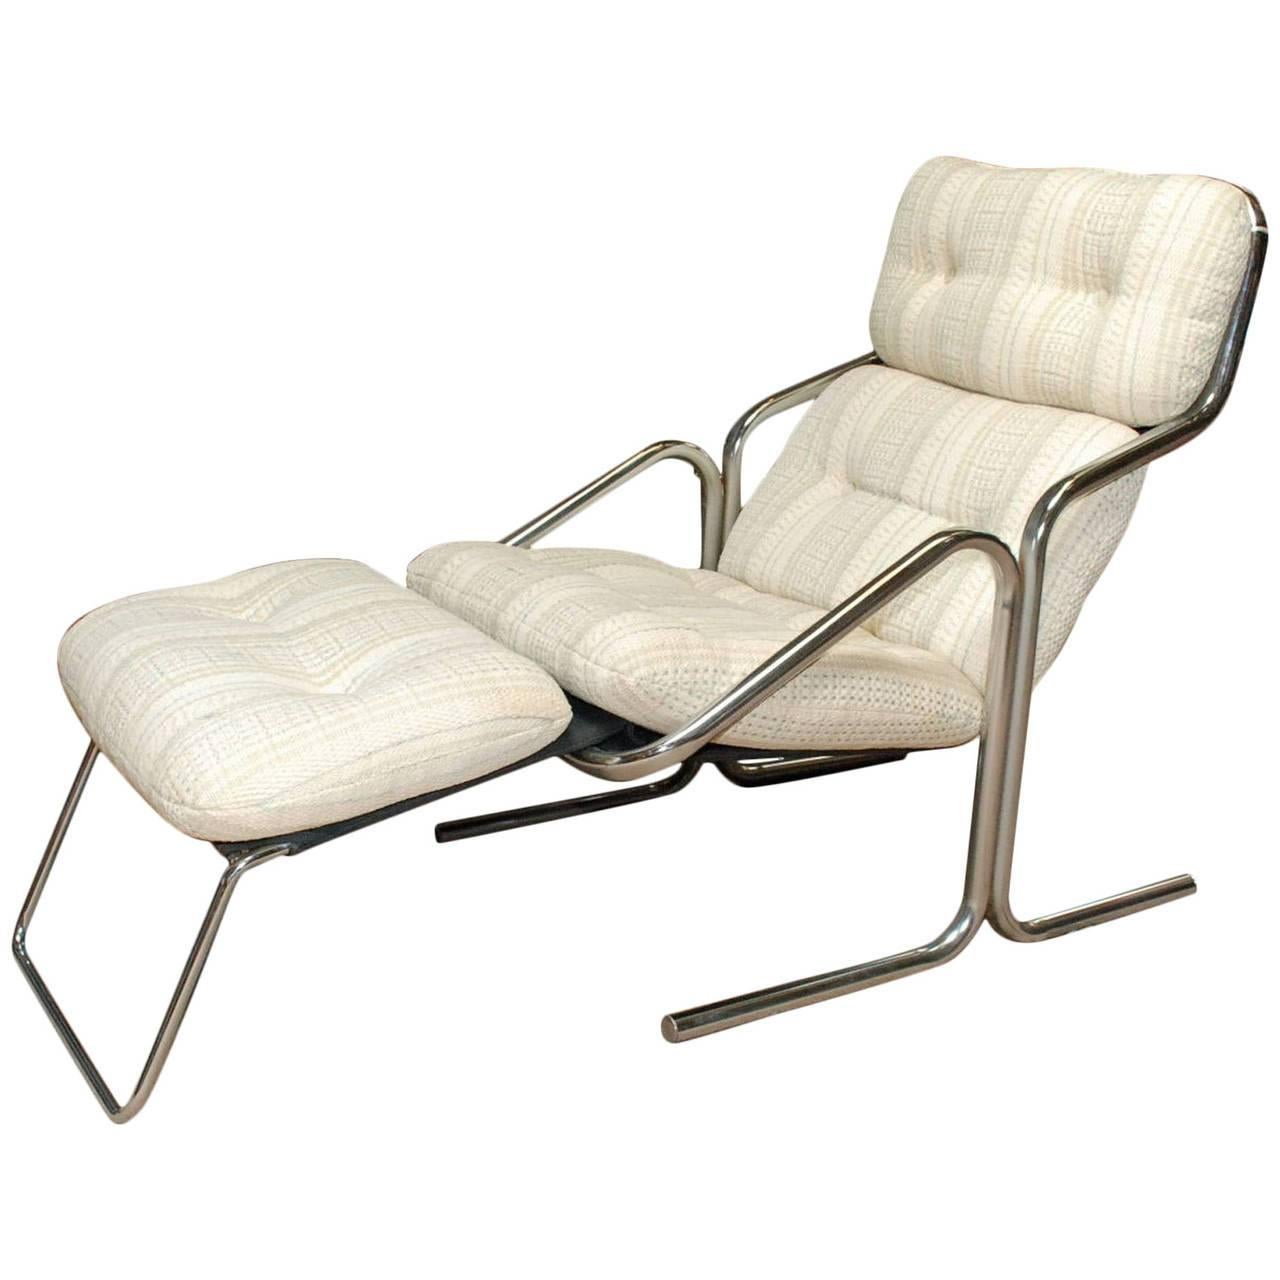 Mid-Century Lounger by Jerry Johnson FINAL CLEARANCE SALE